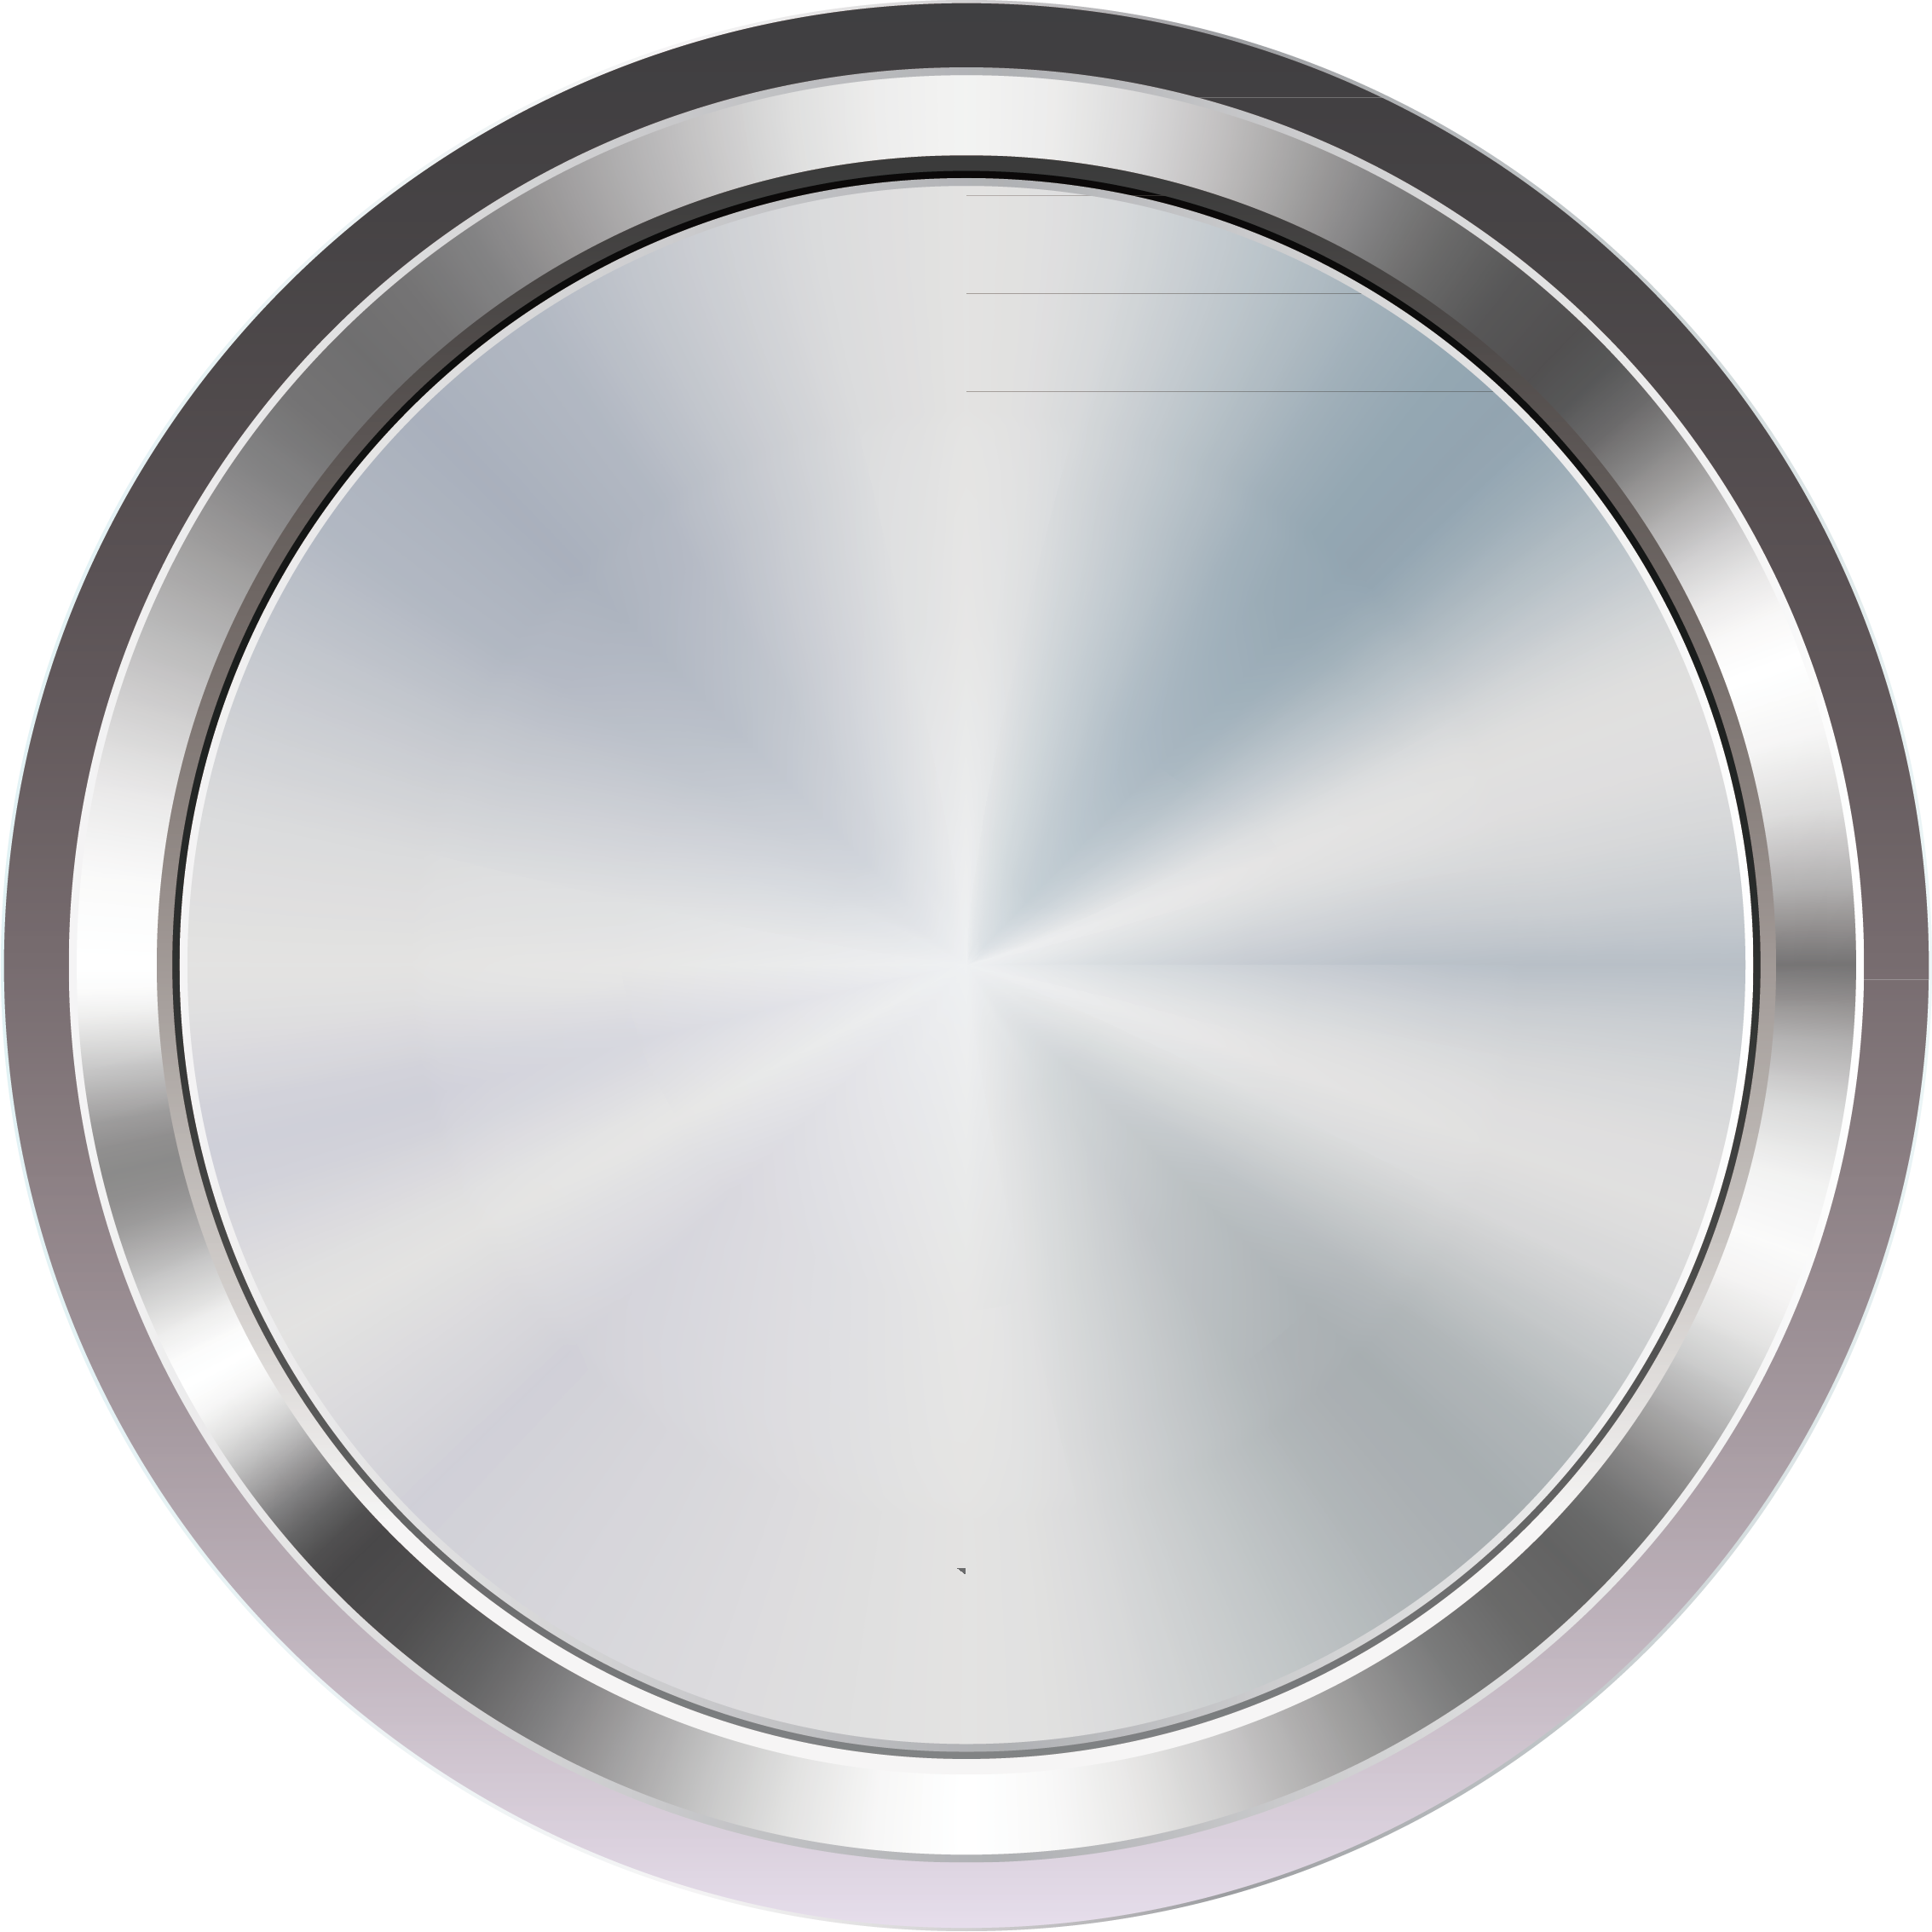 Button Round Free HQ Image PNG Image